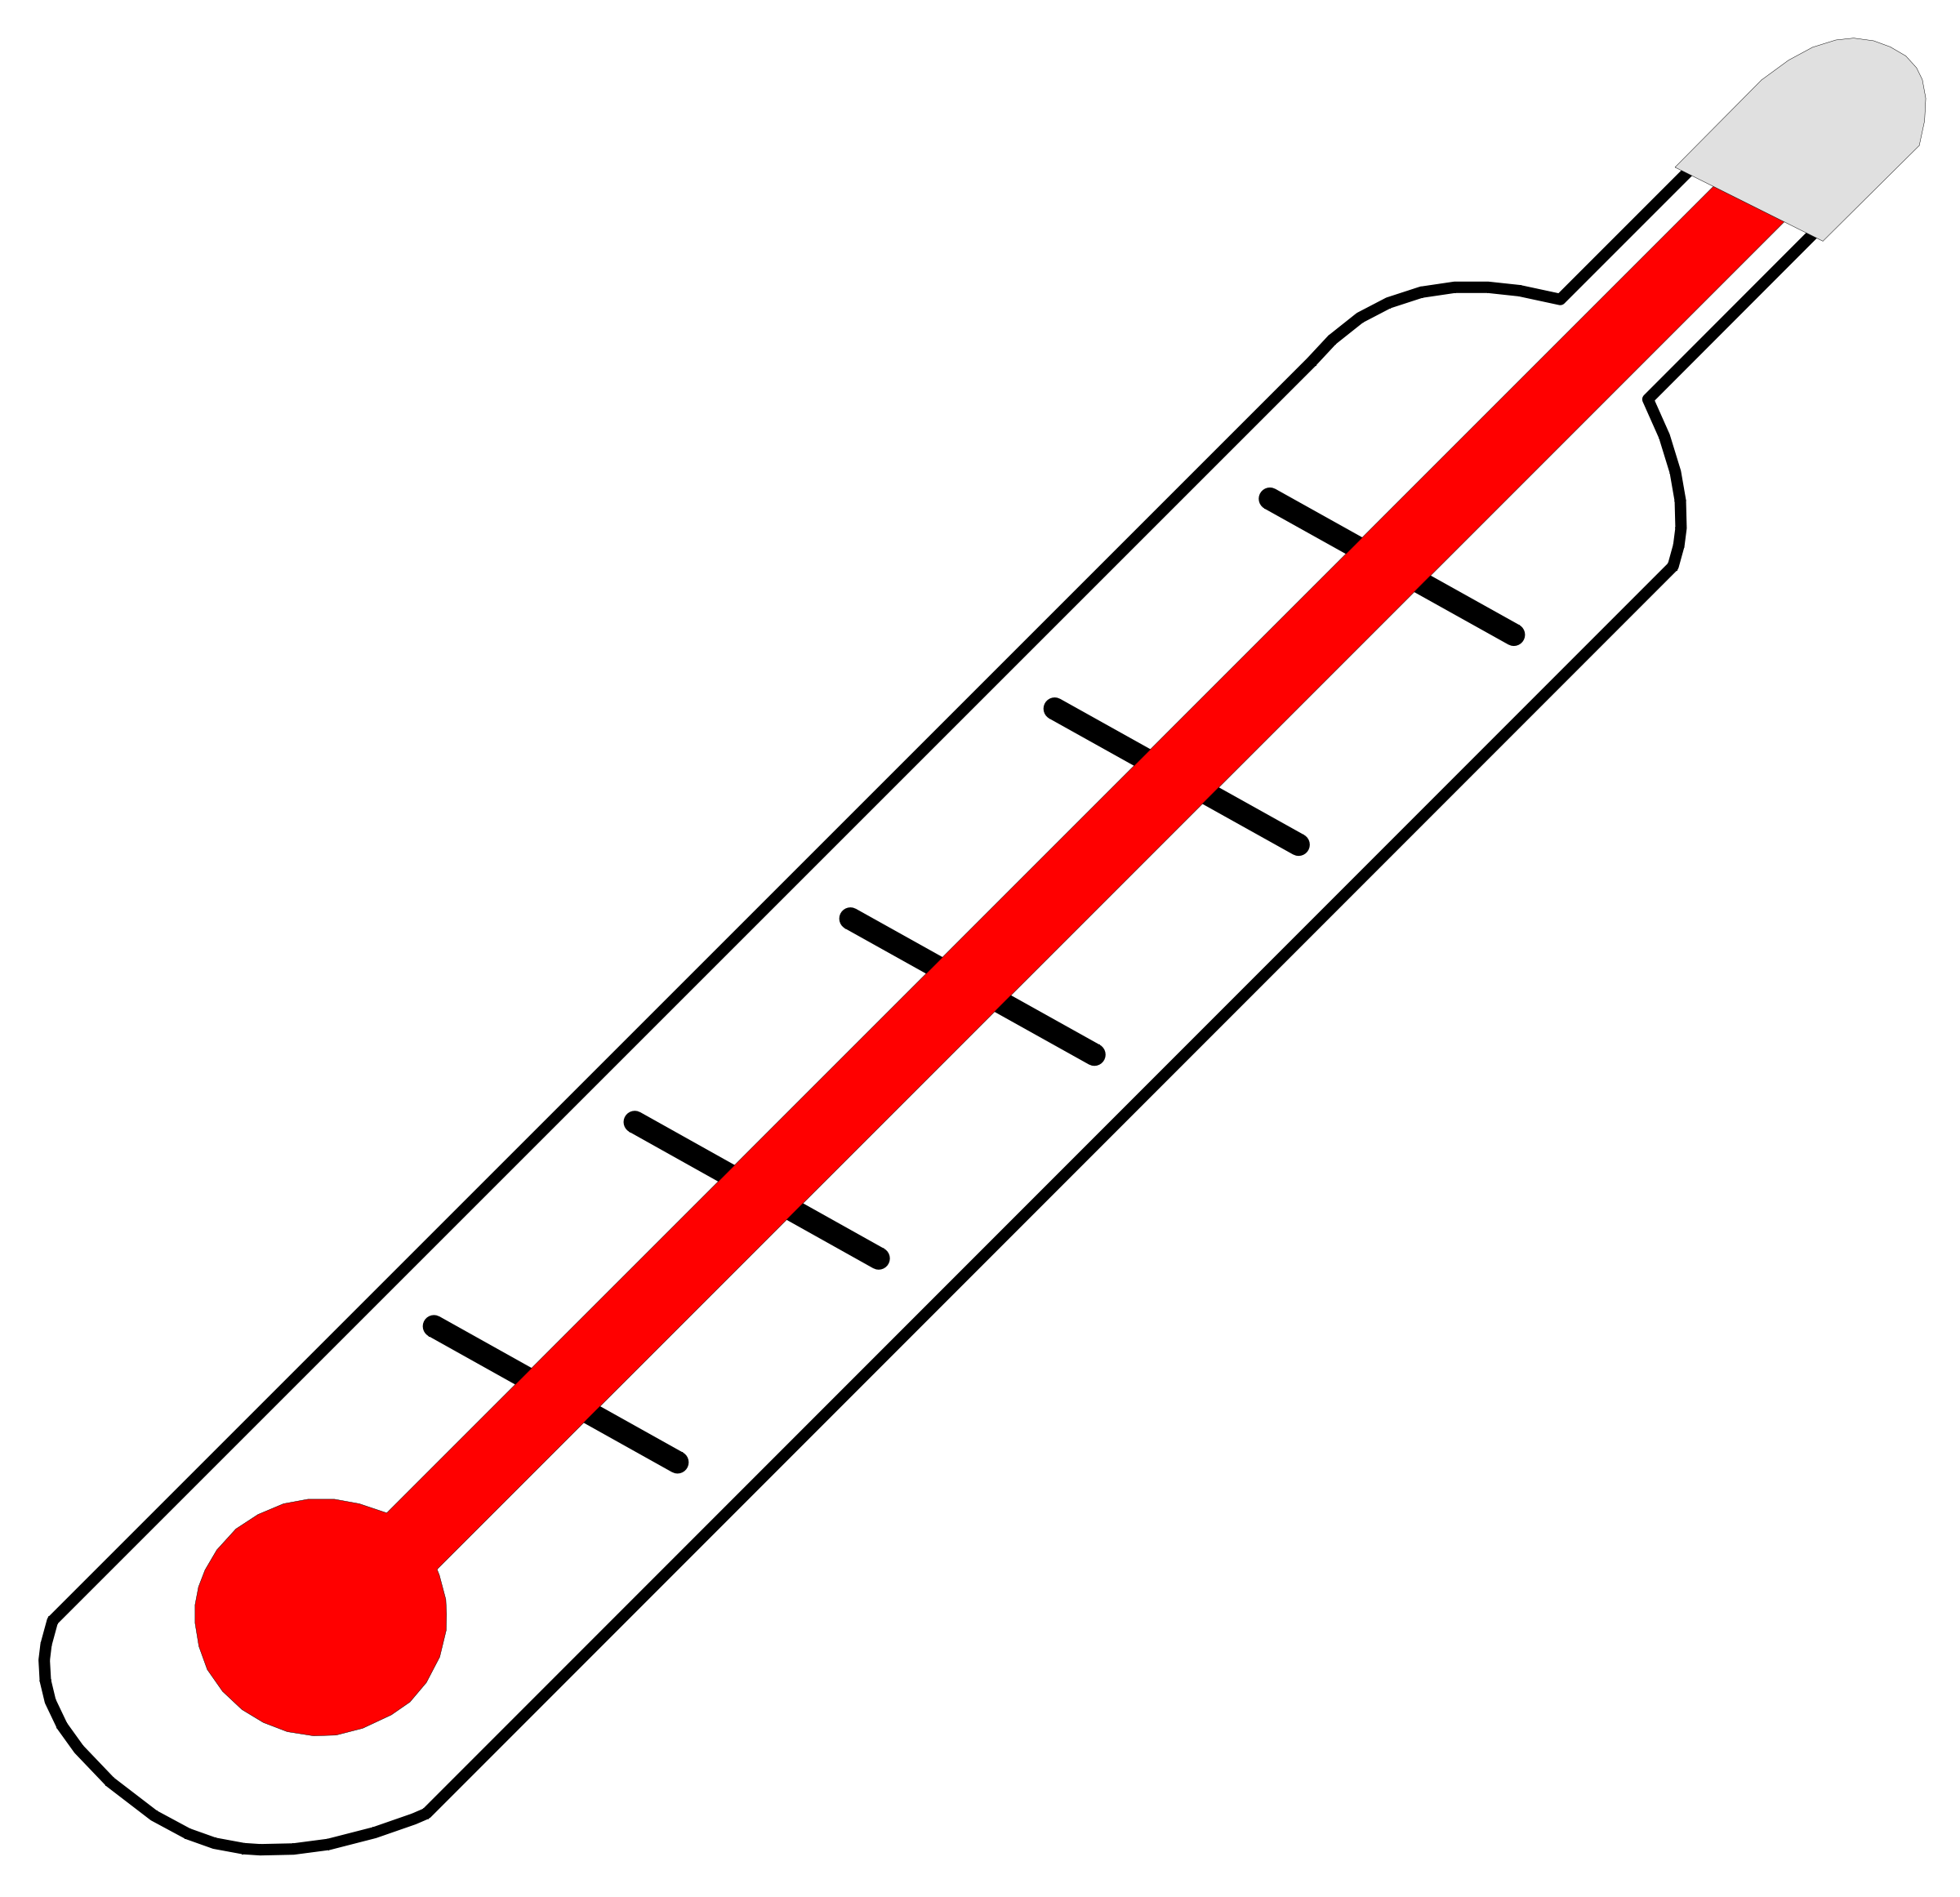 Cold clipart sick. Fundraising thermometer clip art